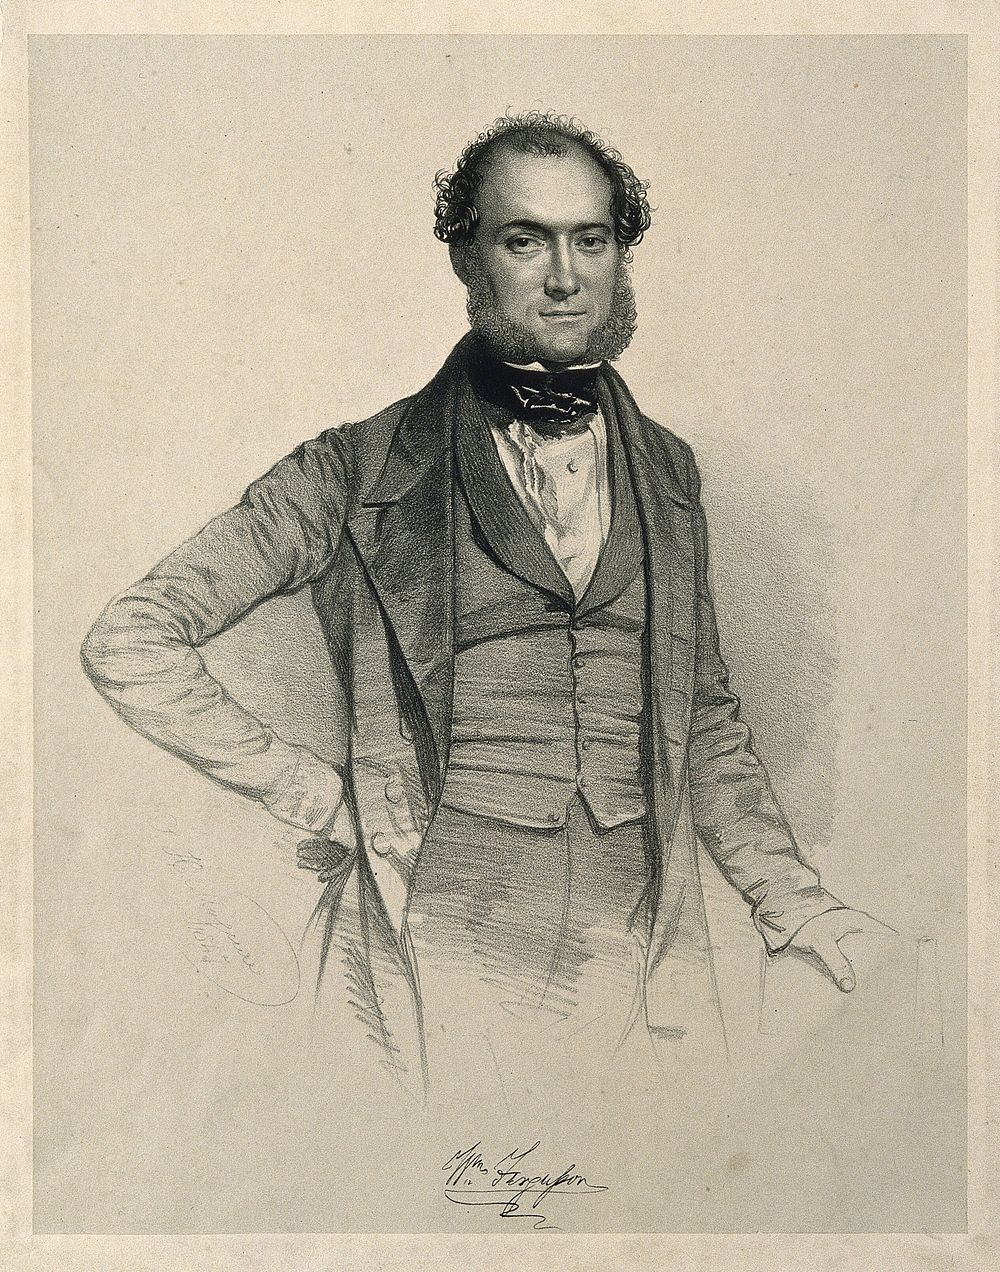 Sir William Fergusson. Lithograph by T.H. Maguire, 1847.